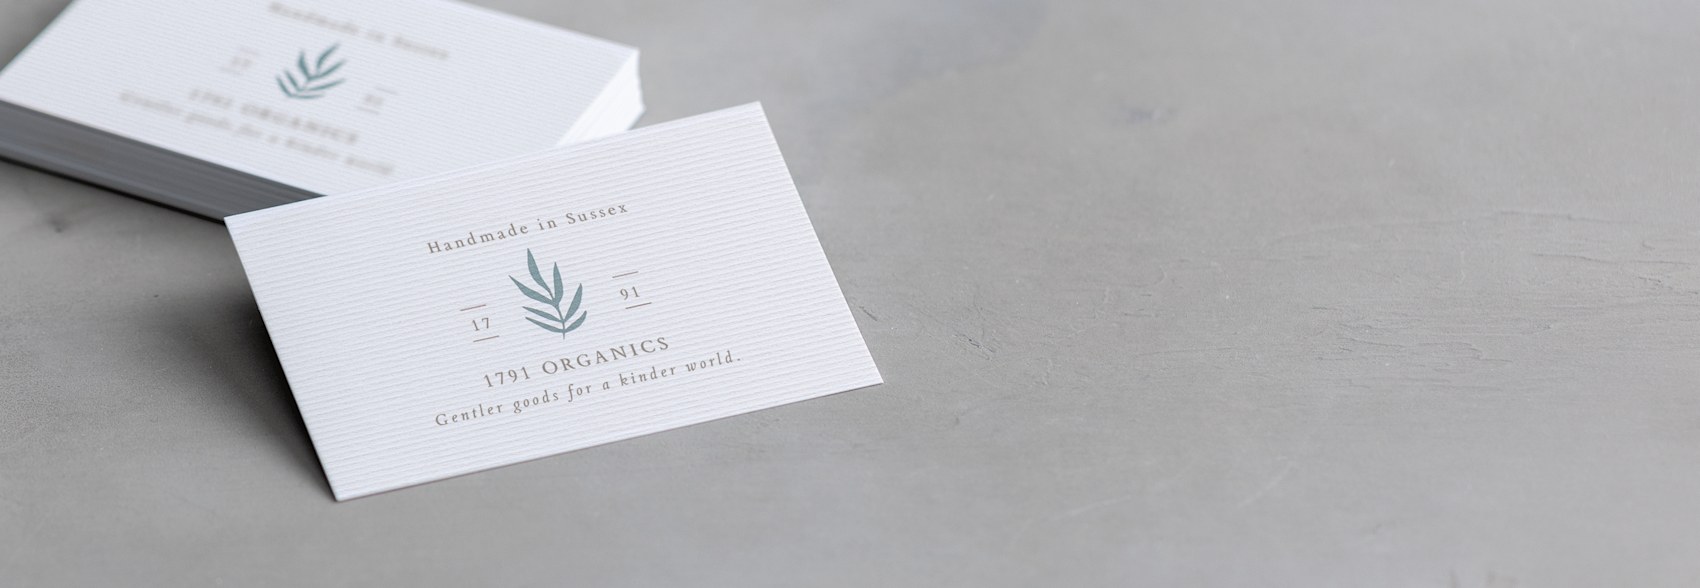 Corrugated business cards